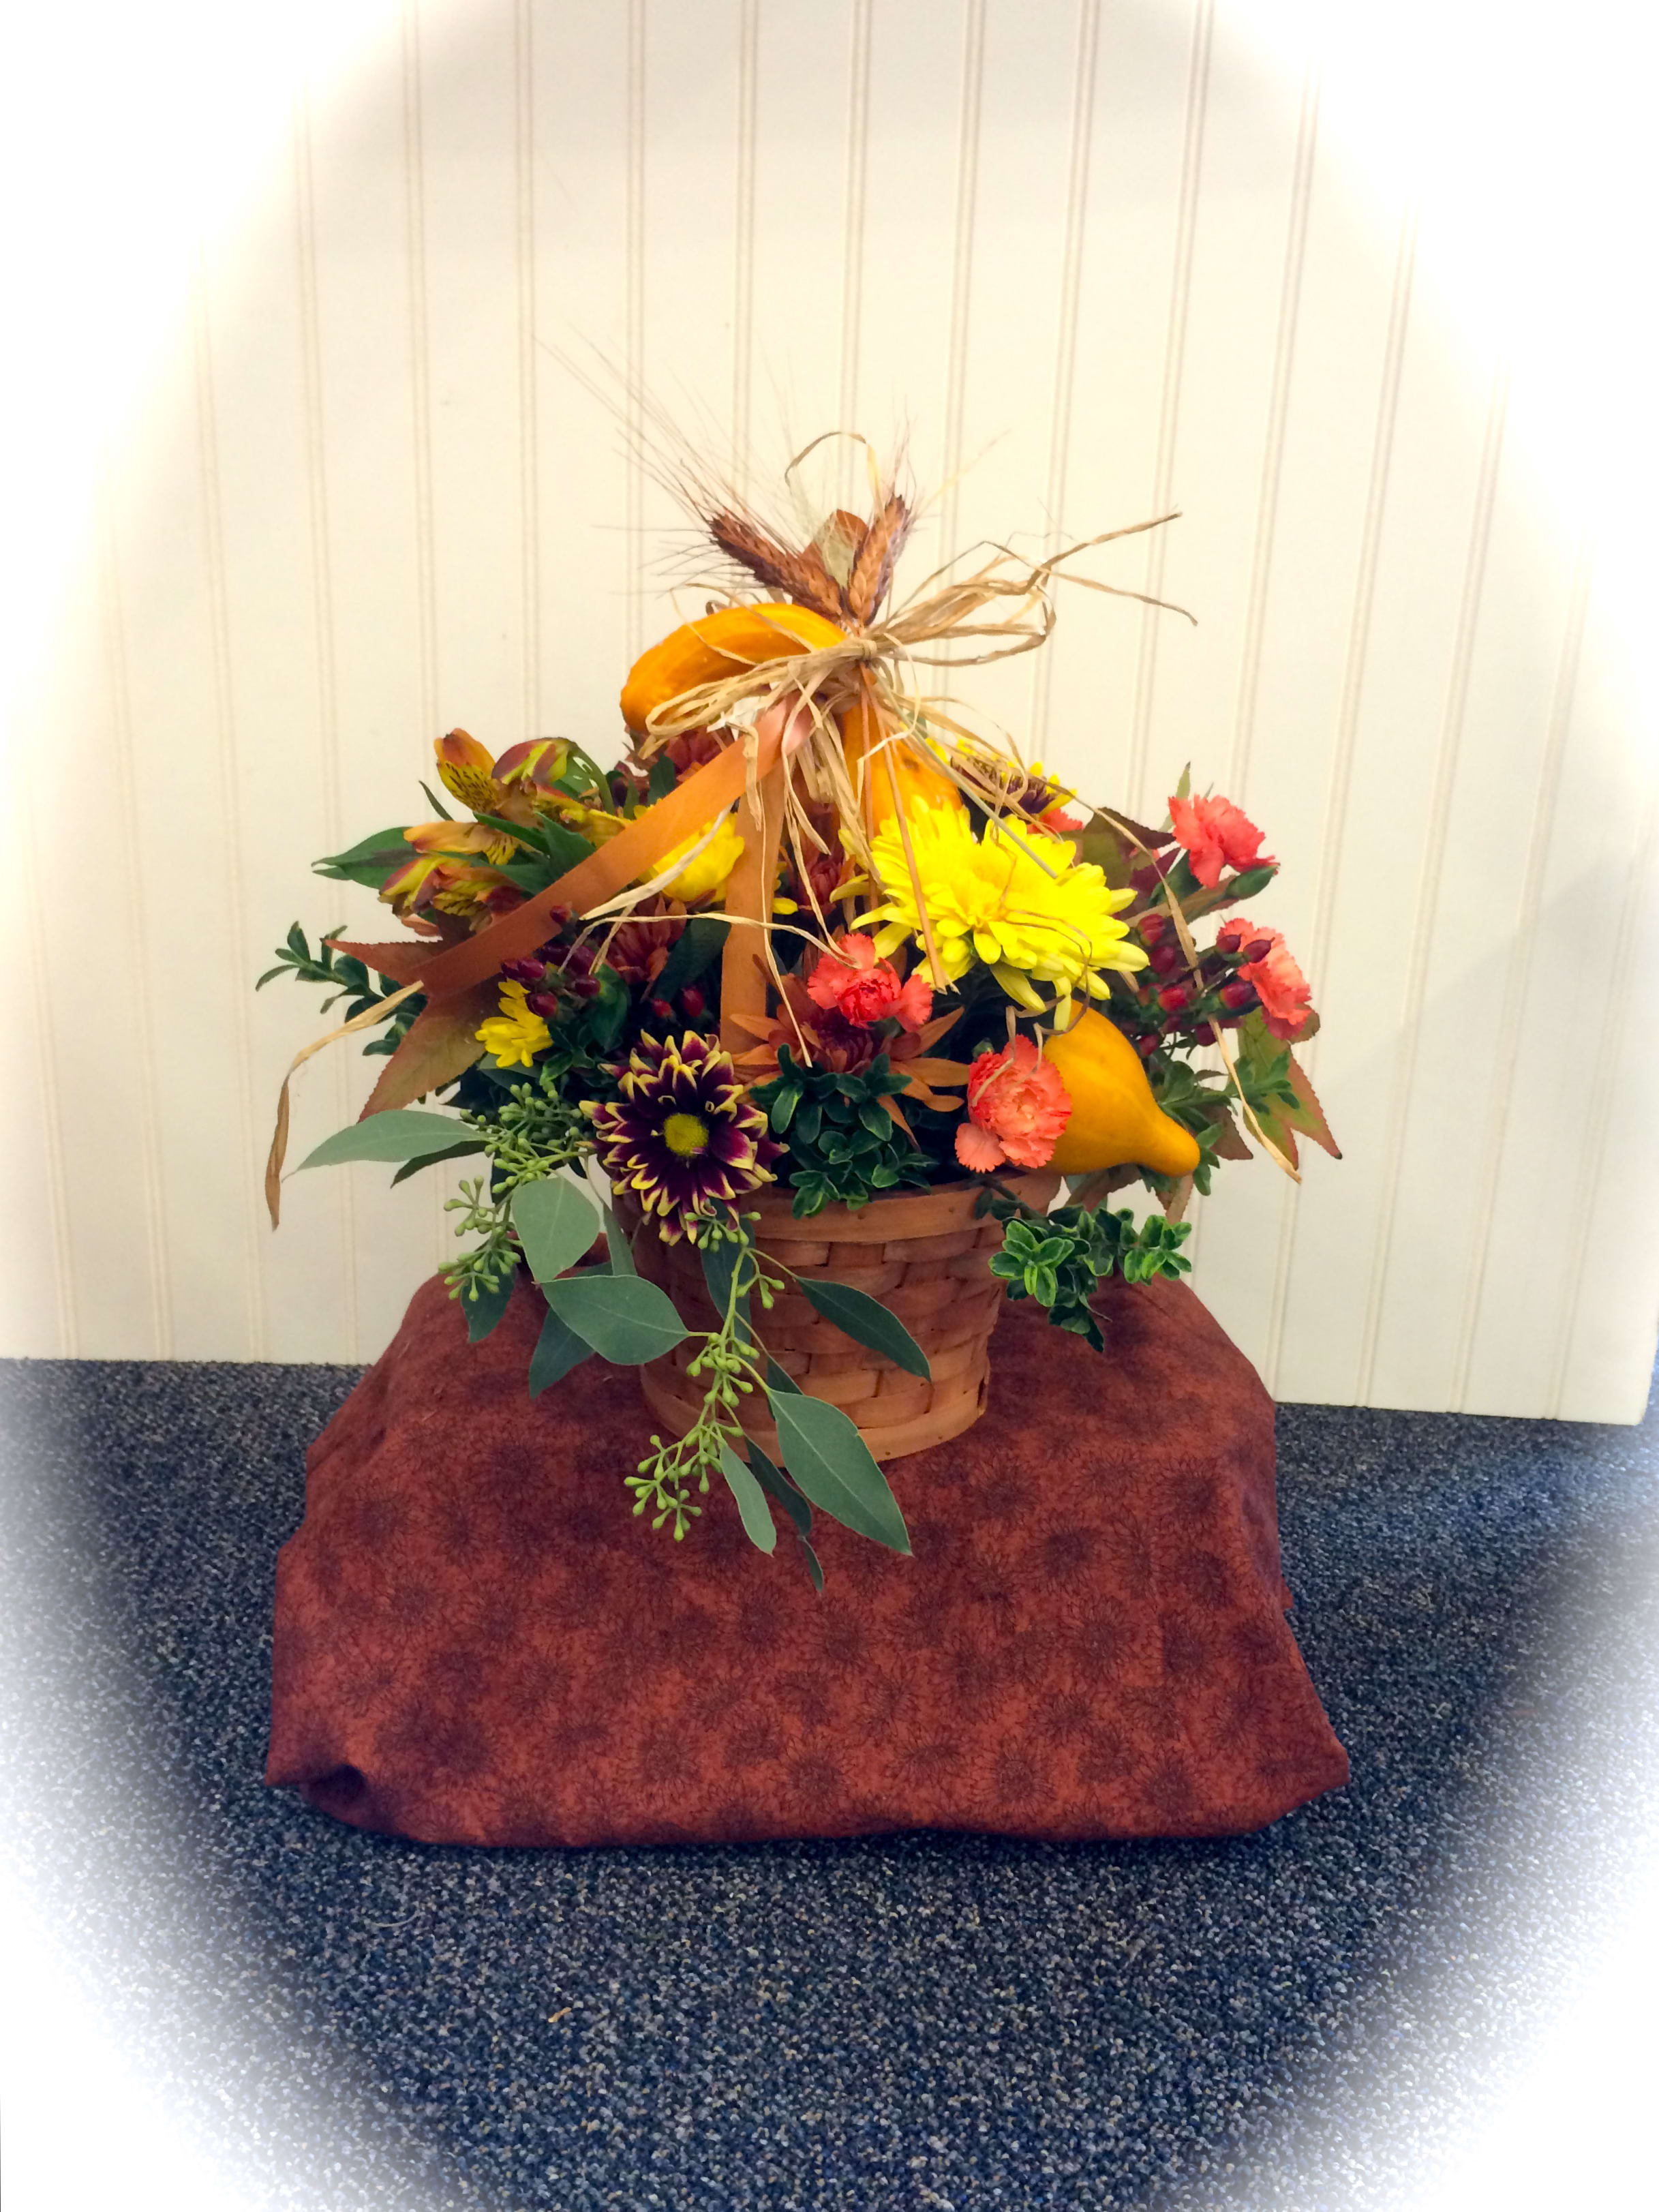 Autumn Basket - A fall basket of mums, mini-carnations, eucalyptus &amp; greens. Tied with raffia, wheat and accented with gourds!